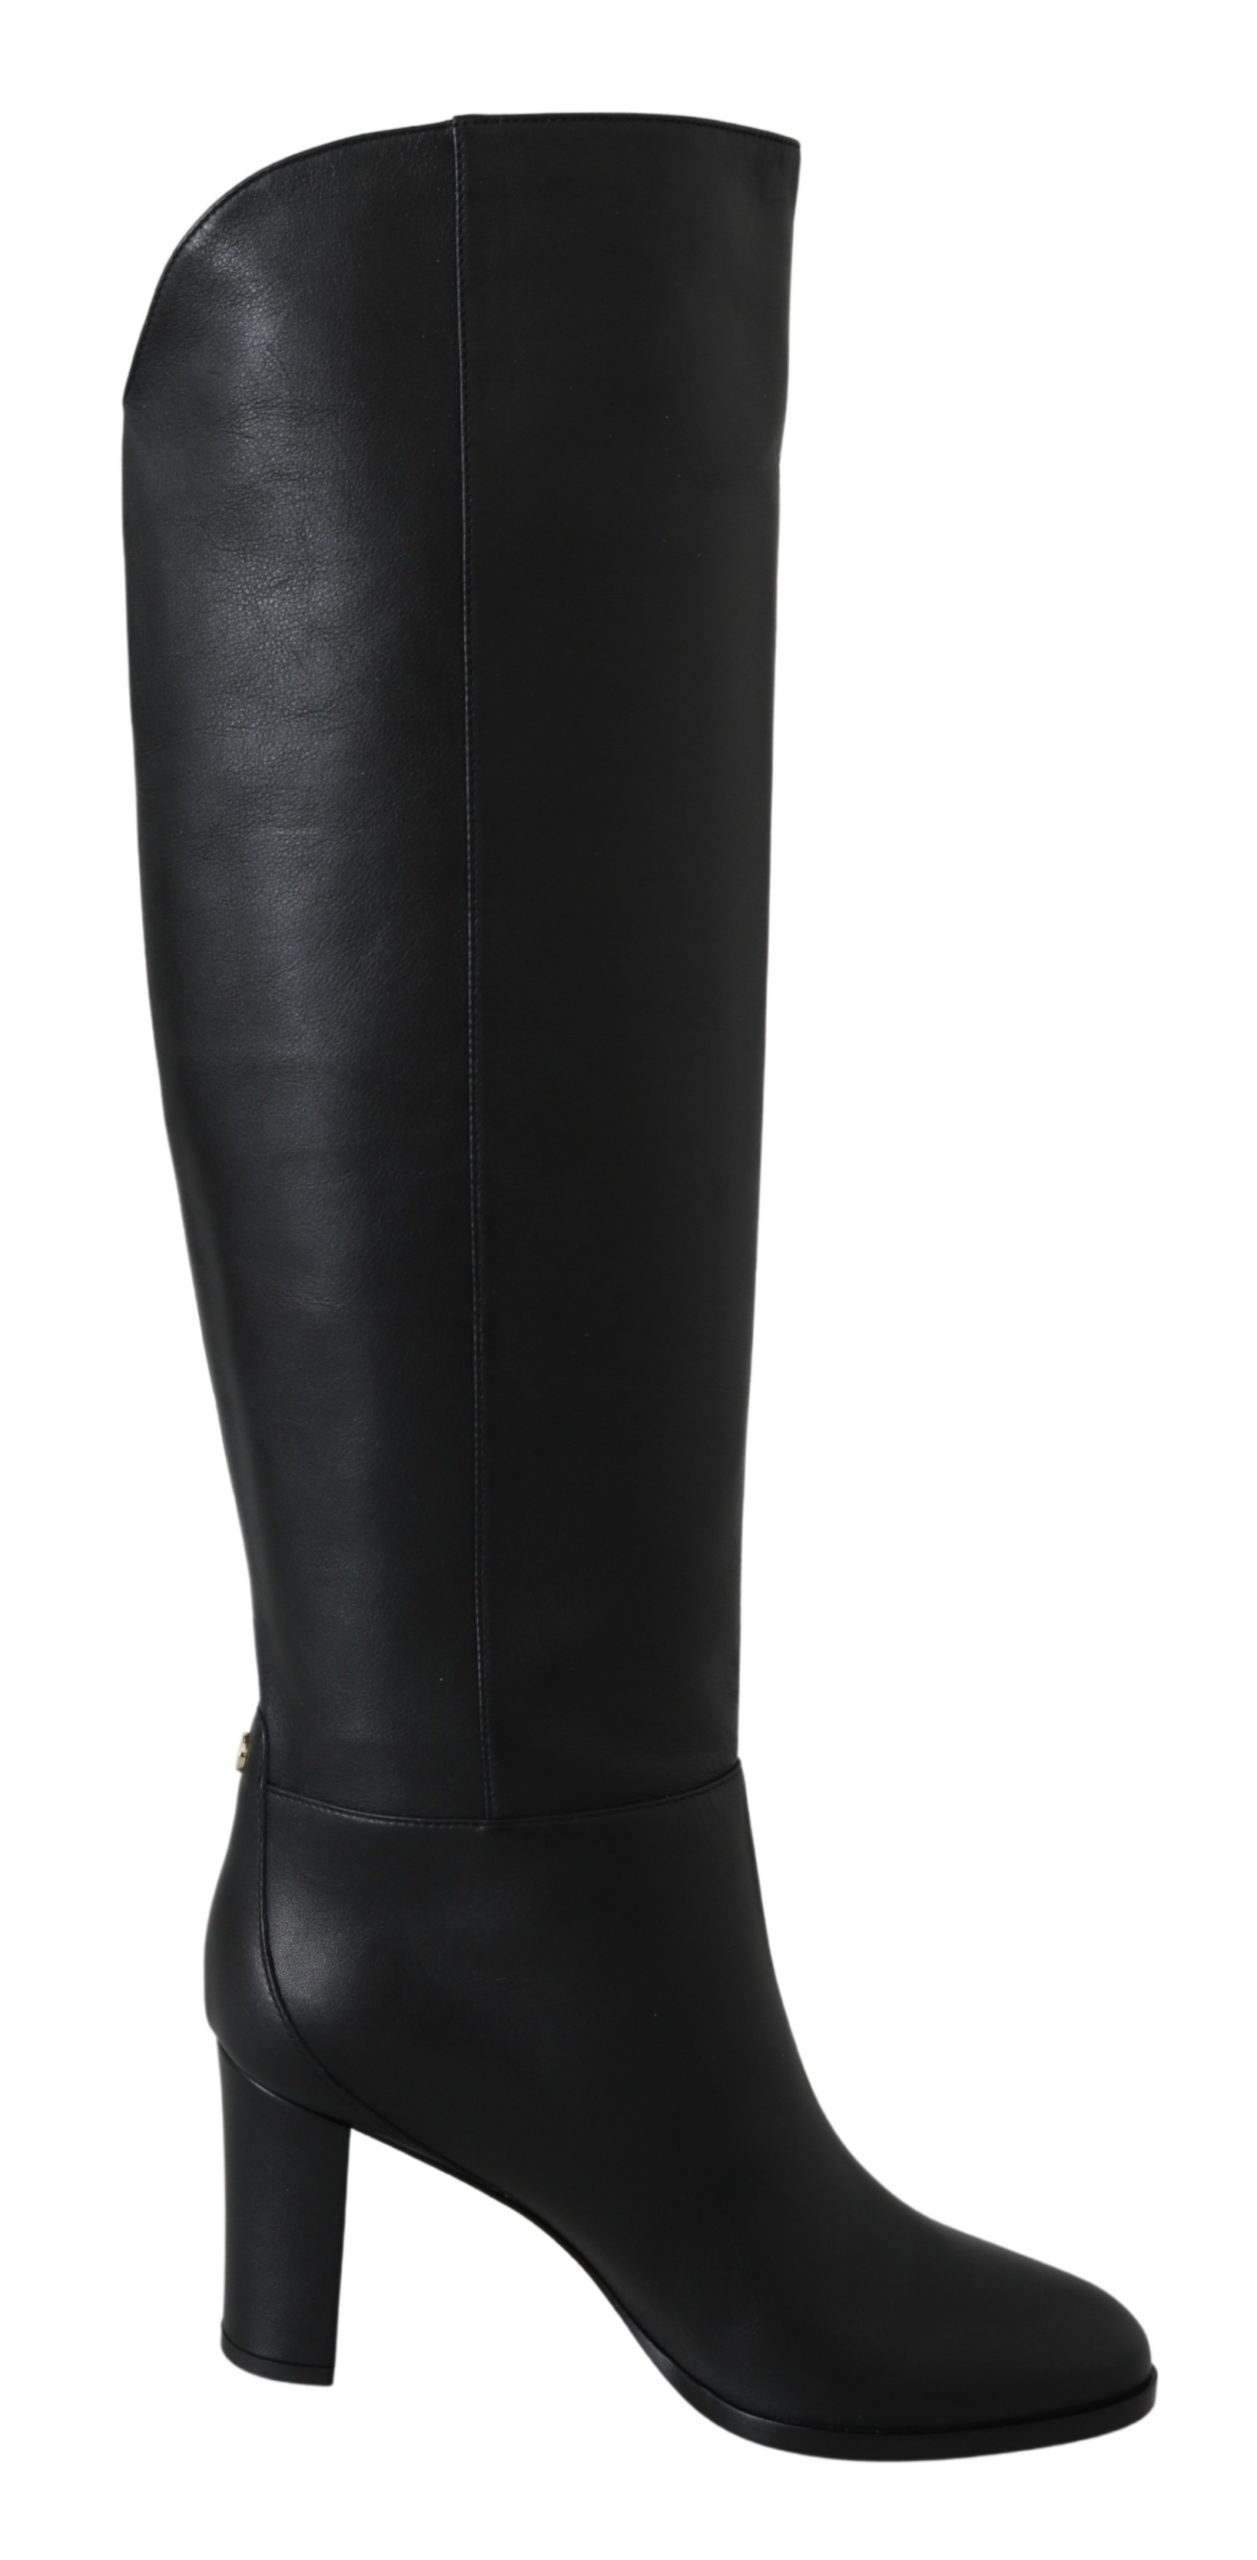 Jimmy Choo Madalie 80 Black Leather Boots #women, Black, Boots - Women - Shoes, EU36.5/US6, EU36/US5.5, EU37/US6.5, EU38.5/US8, EU38/US7.5, EU39.5/US9, EU39/US8.5, EU40/US9.5, feed-agegroup-adult, feed-color-black, feed-gender-female, feed-size-US5.5, feed-size-US6.5, feed-size-US7.5, feed-size-US8, feed-size-US8.5, Gender_Women, Shoes - New Arrivals at SEYMAYKA